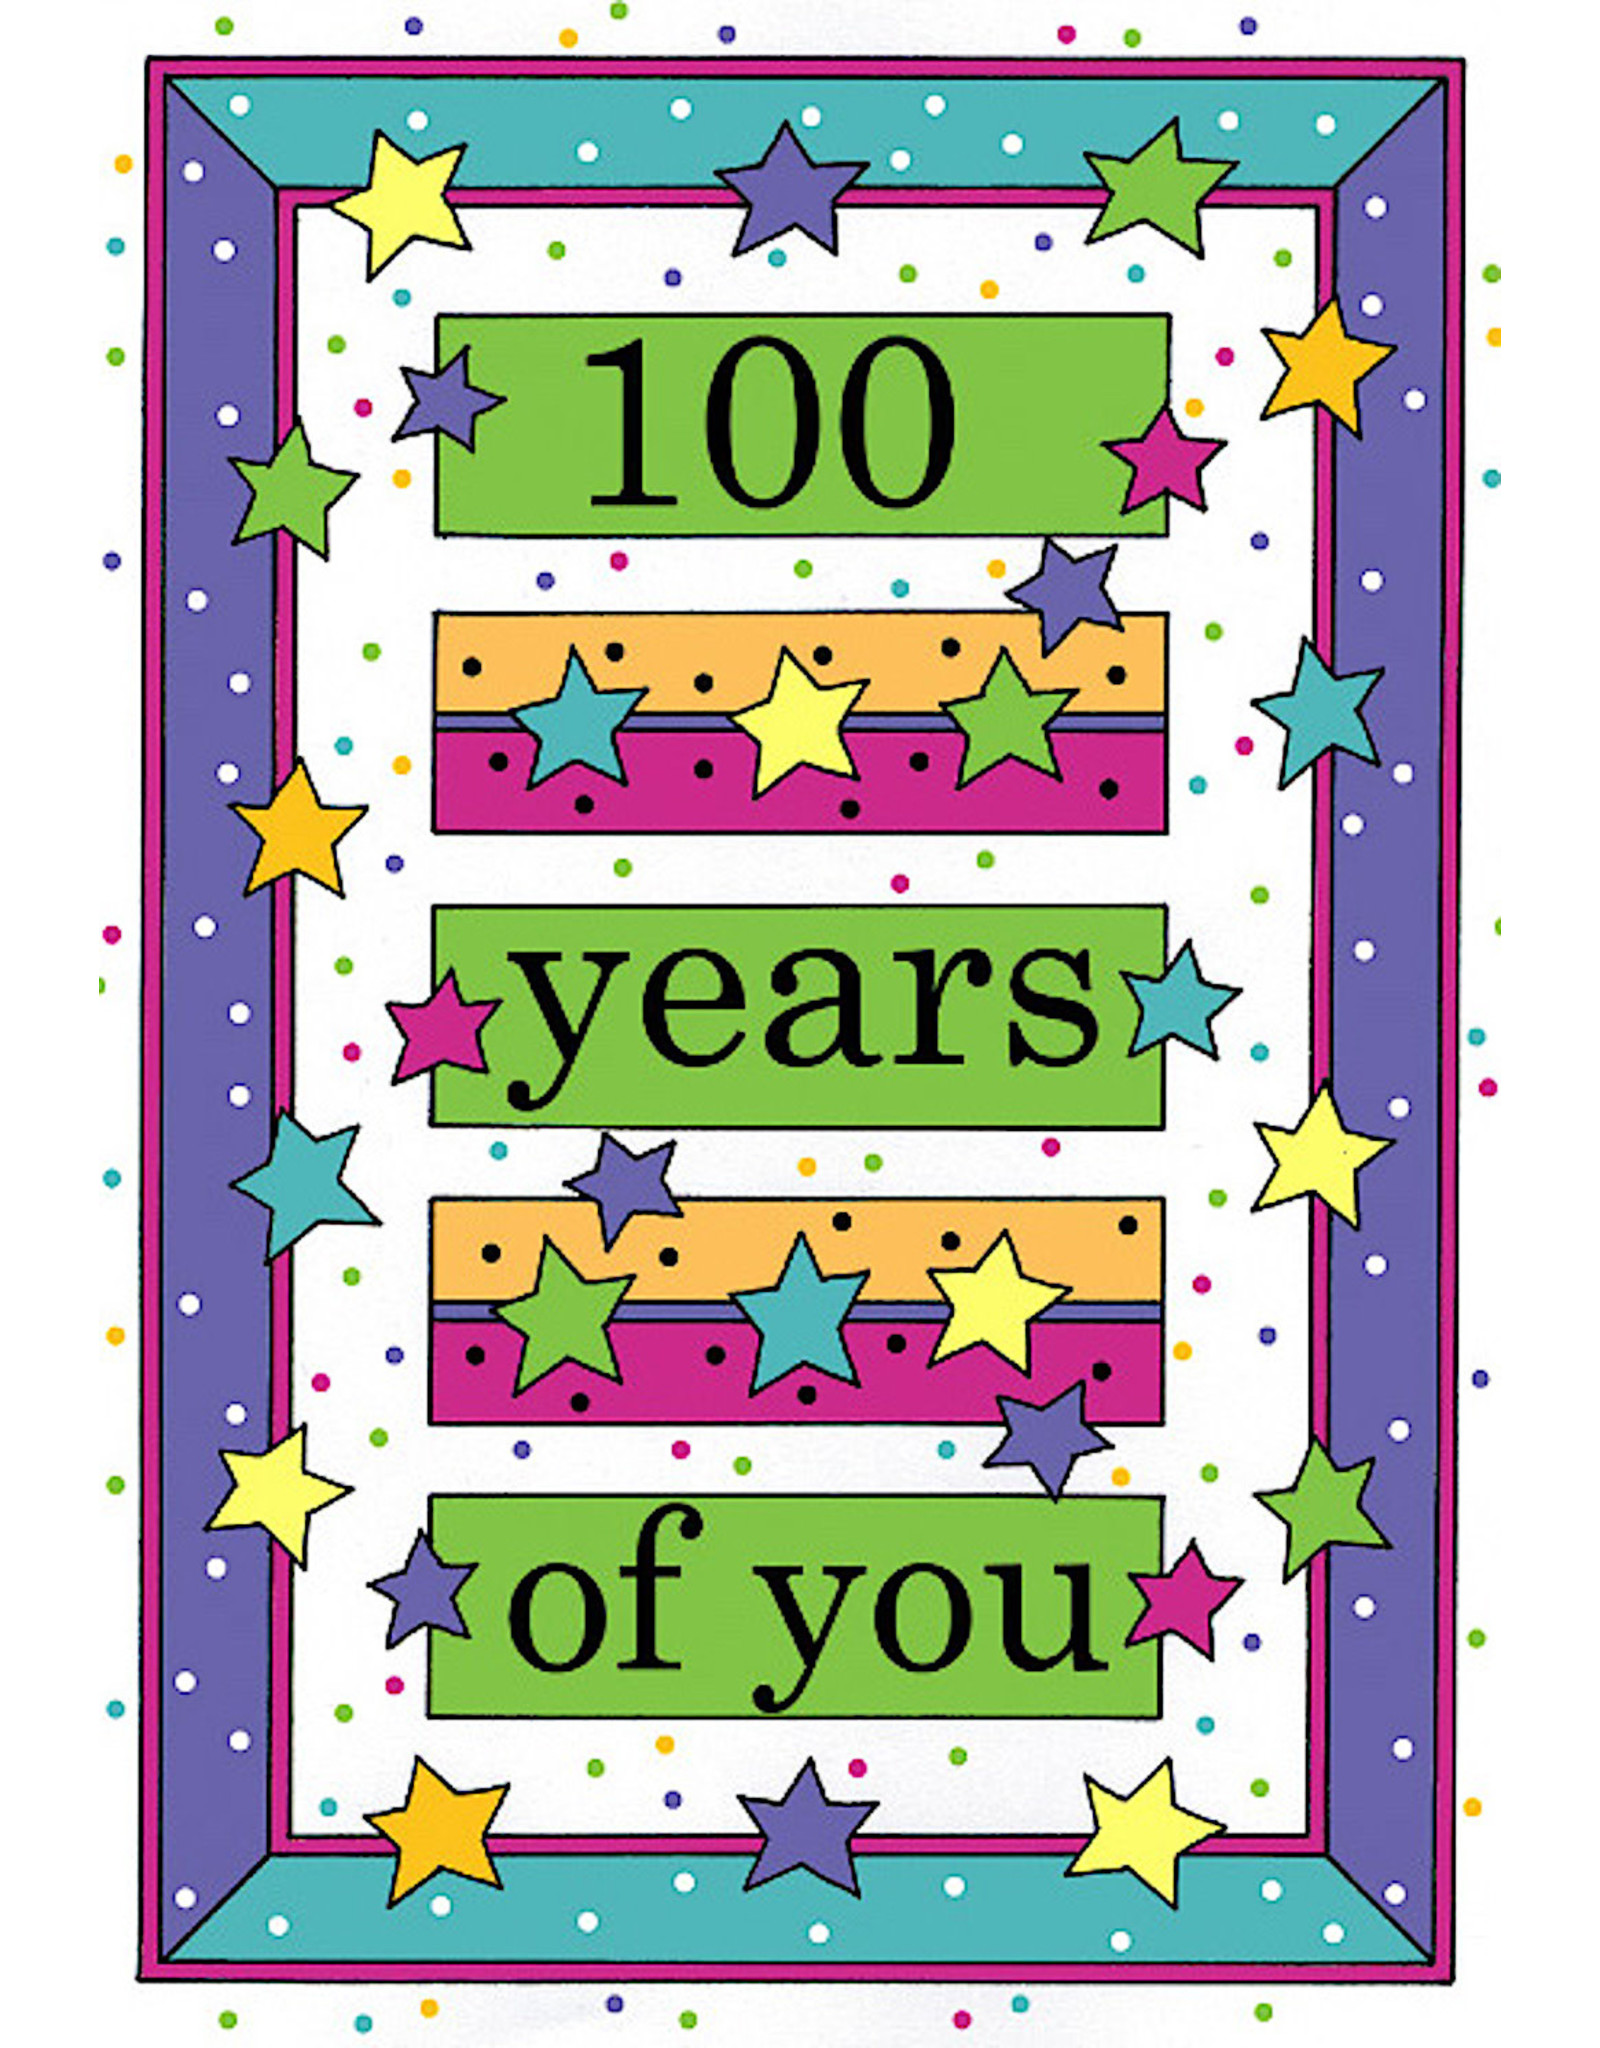 Recycled Paper Greetings Birthday Card 100th Birthday 100 Years of You